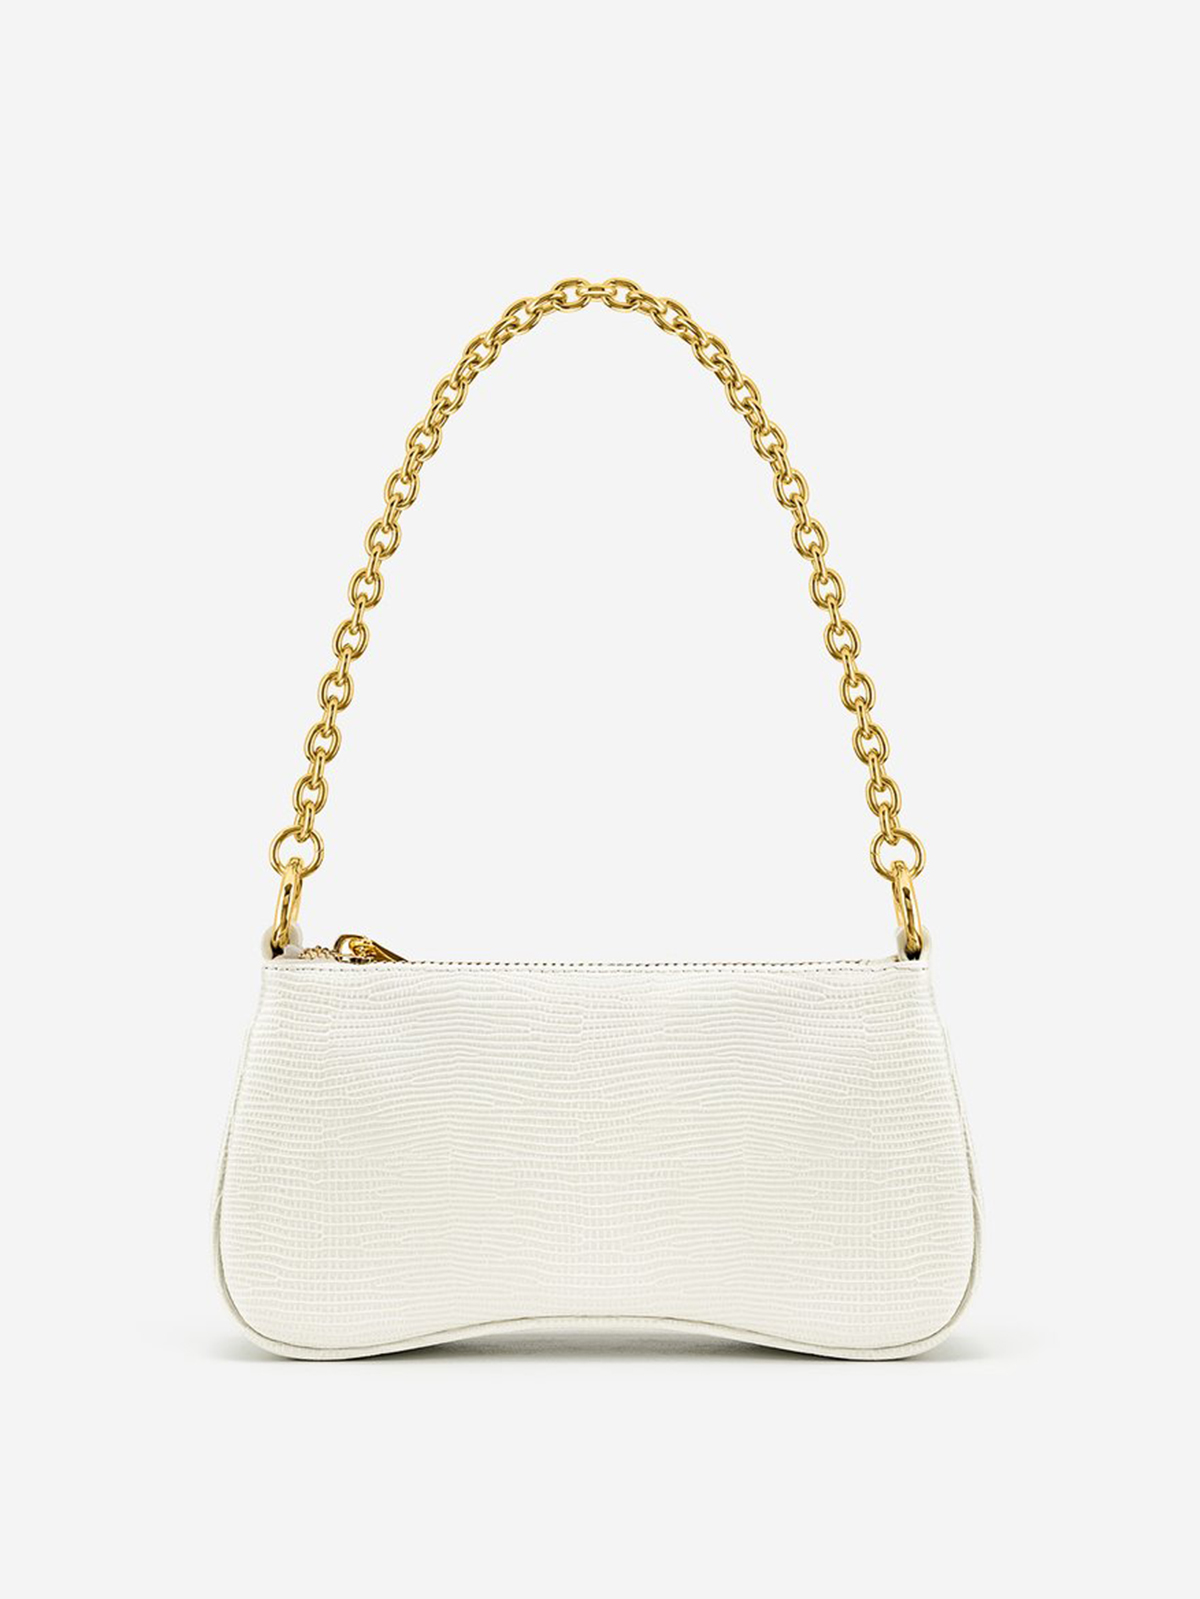 Best Gold-Chain Bags